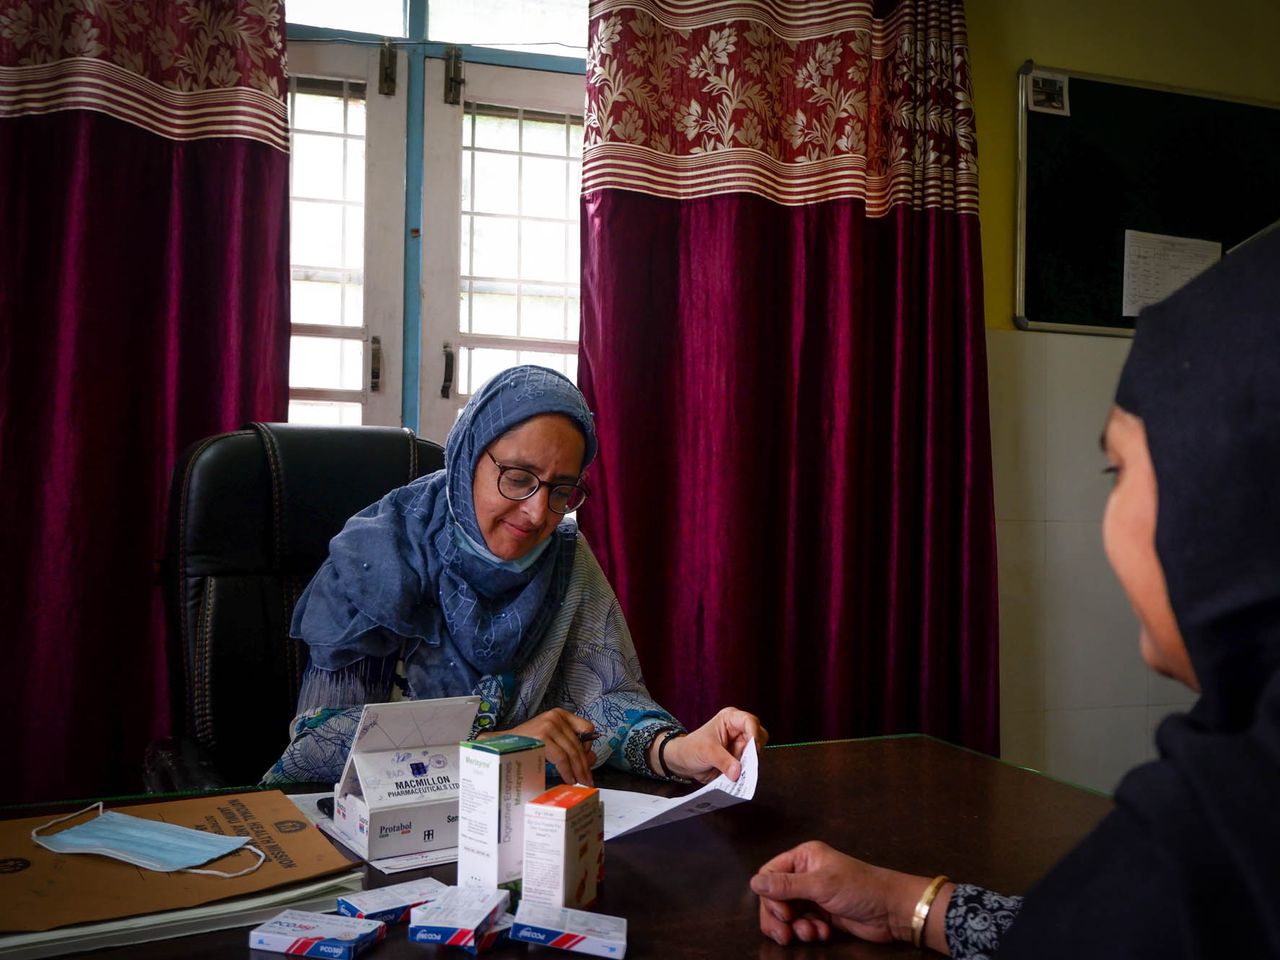 Dr. Riffat, who has been treating tribal women for decades, is seen treating a patient at a hospital on the outskirts of Srinagar. Date: 28 April, 2022.